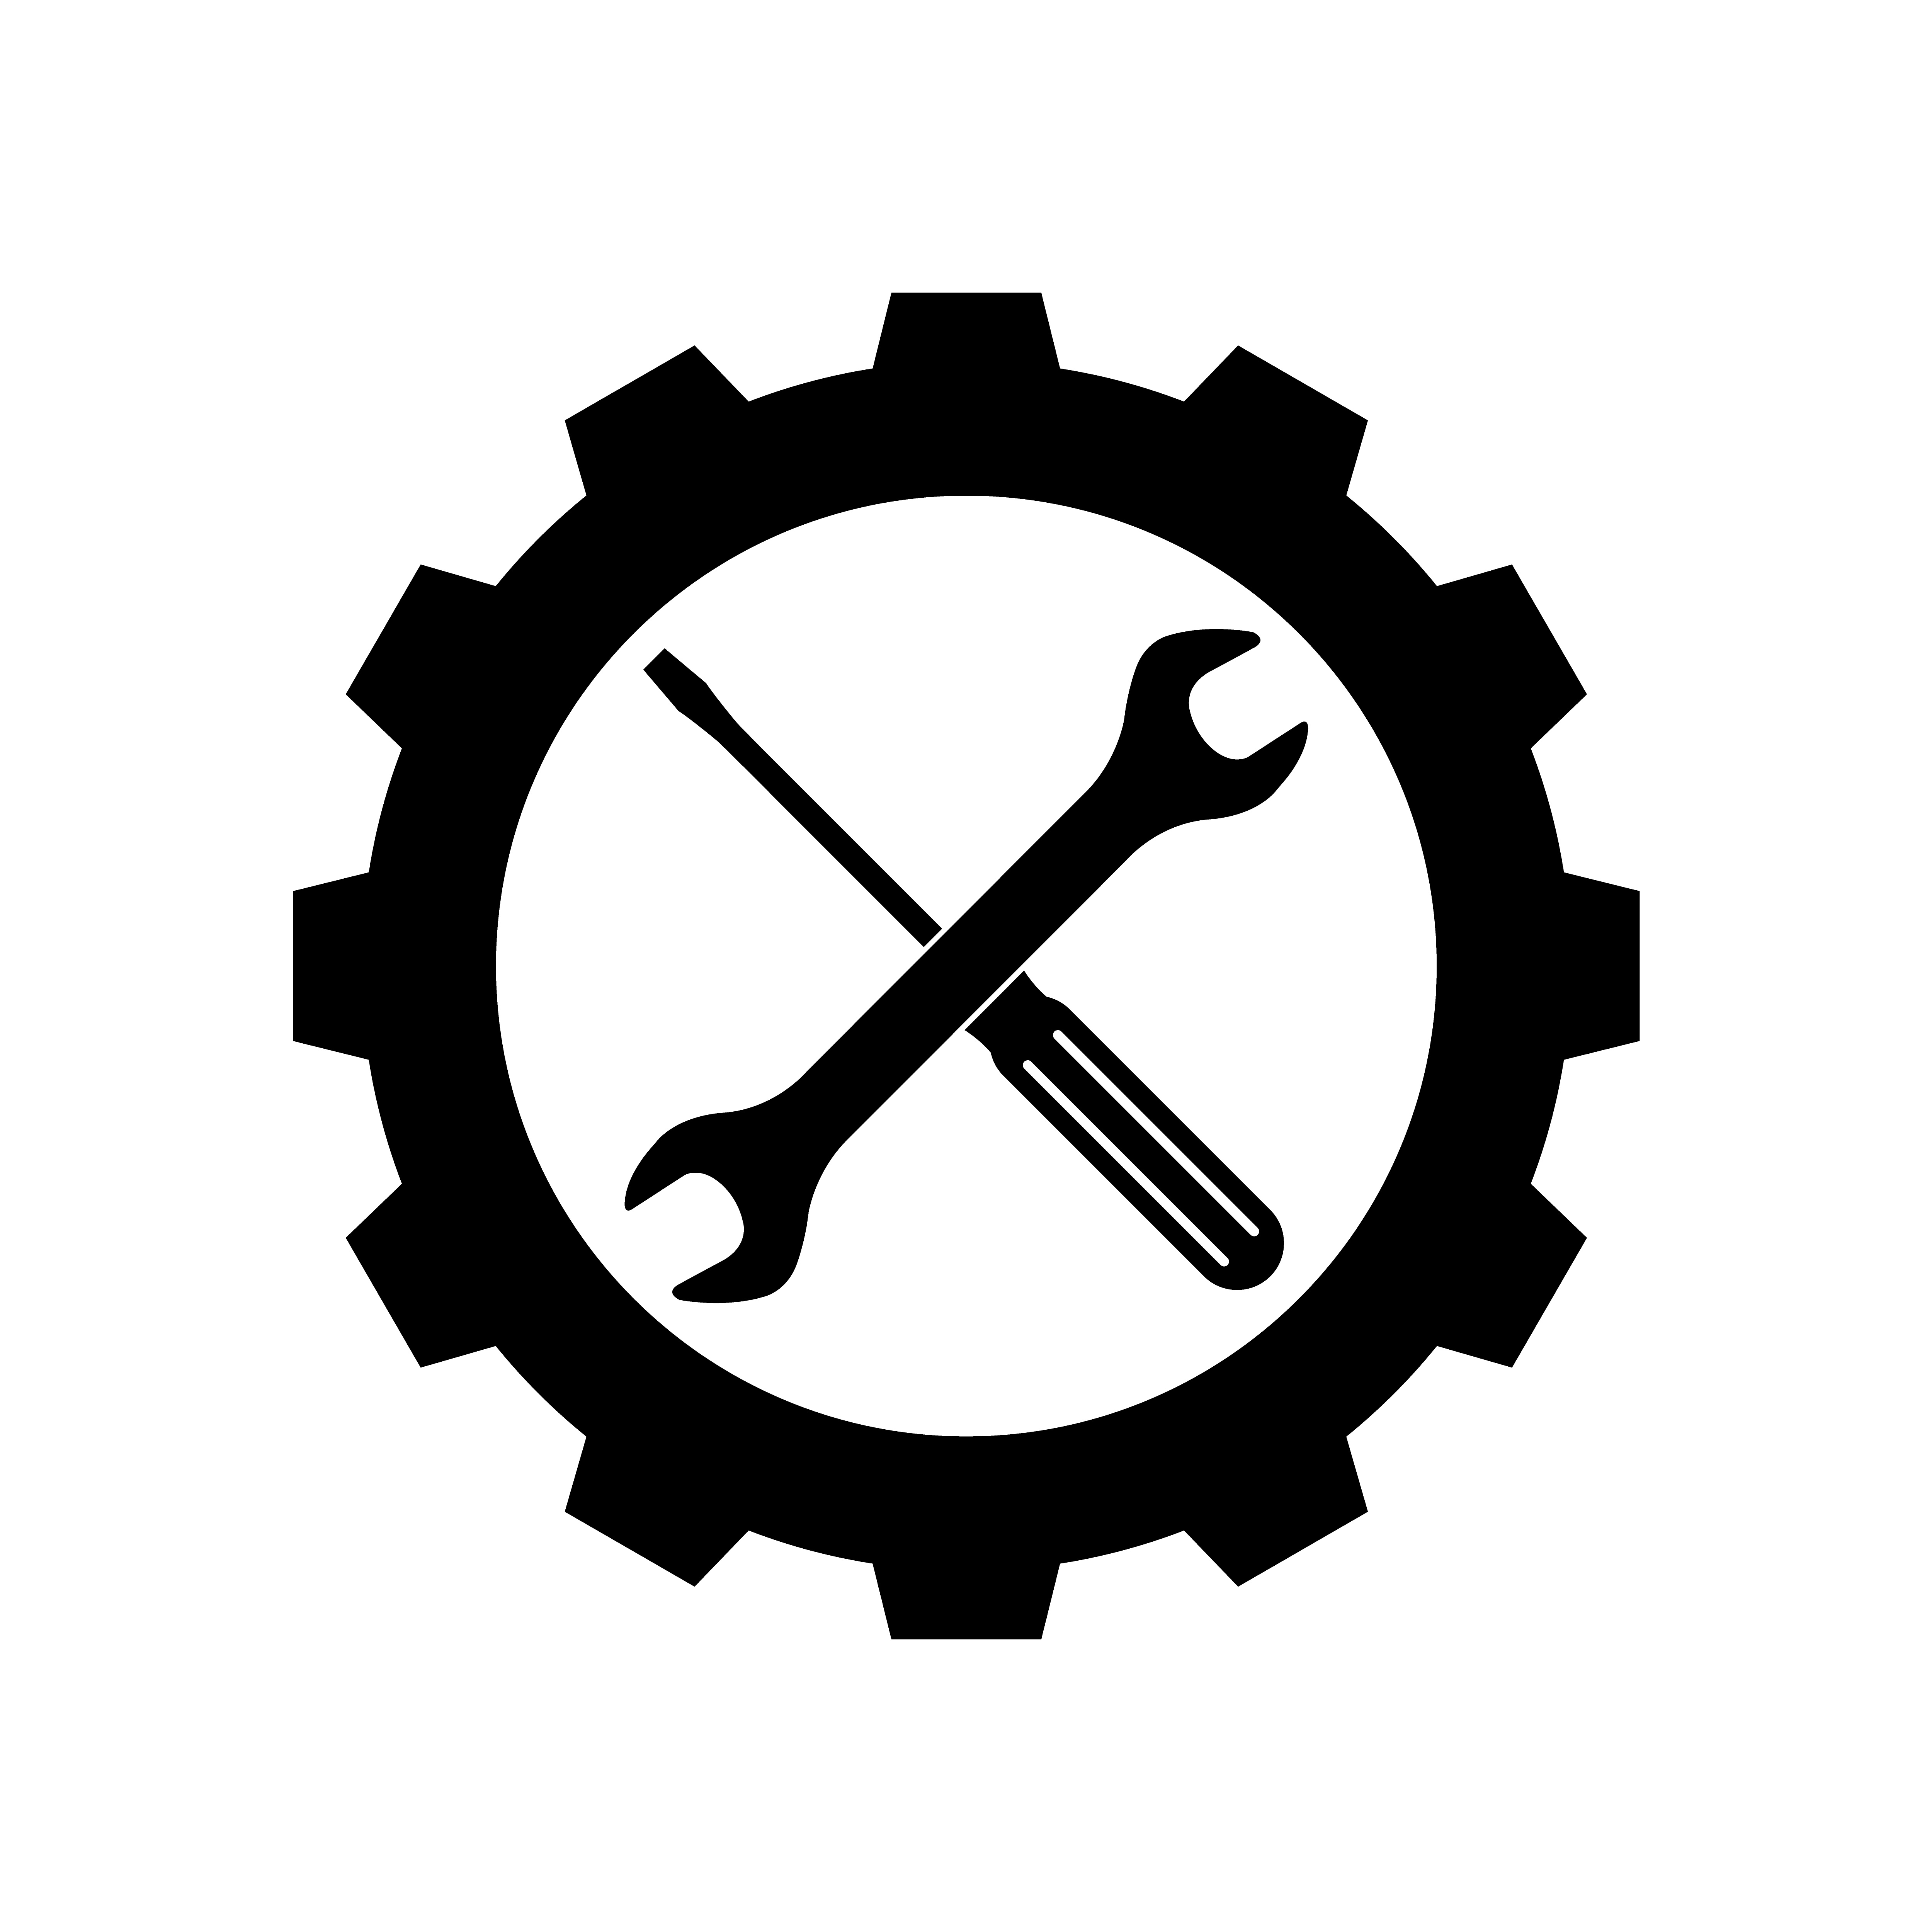 a x made of a screw driver and wrench, surrounded by a sprocket